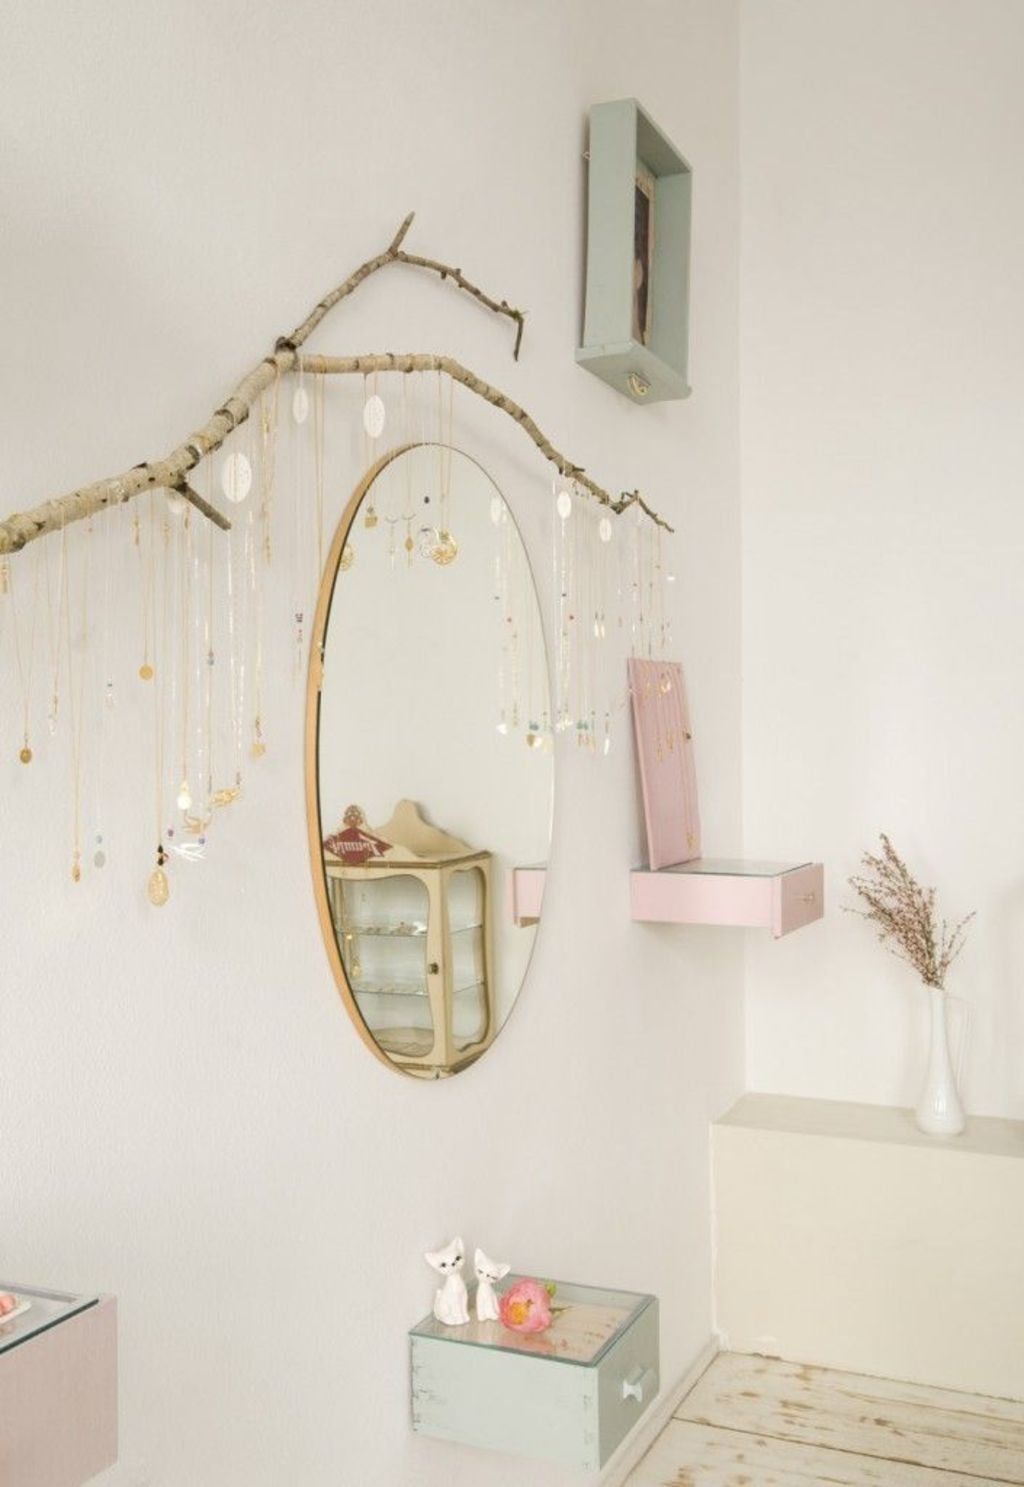 Simple Beautiful DIY Home Decor Ideas Out Off Tree Branches Part 8 | Elonahome.com - Simple Beautiful DIY Home Decor Ideas Out Off Tree Branches Part 8 | Elonahome.com -   18 vintage beauty Room ideas